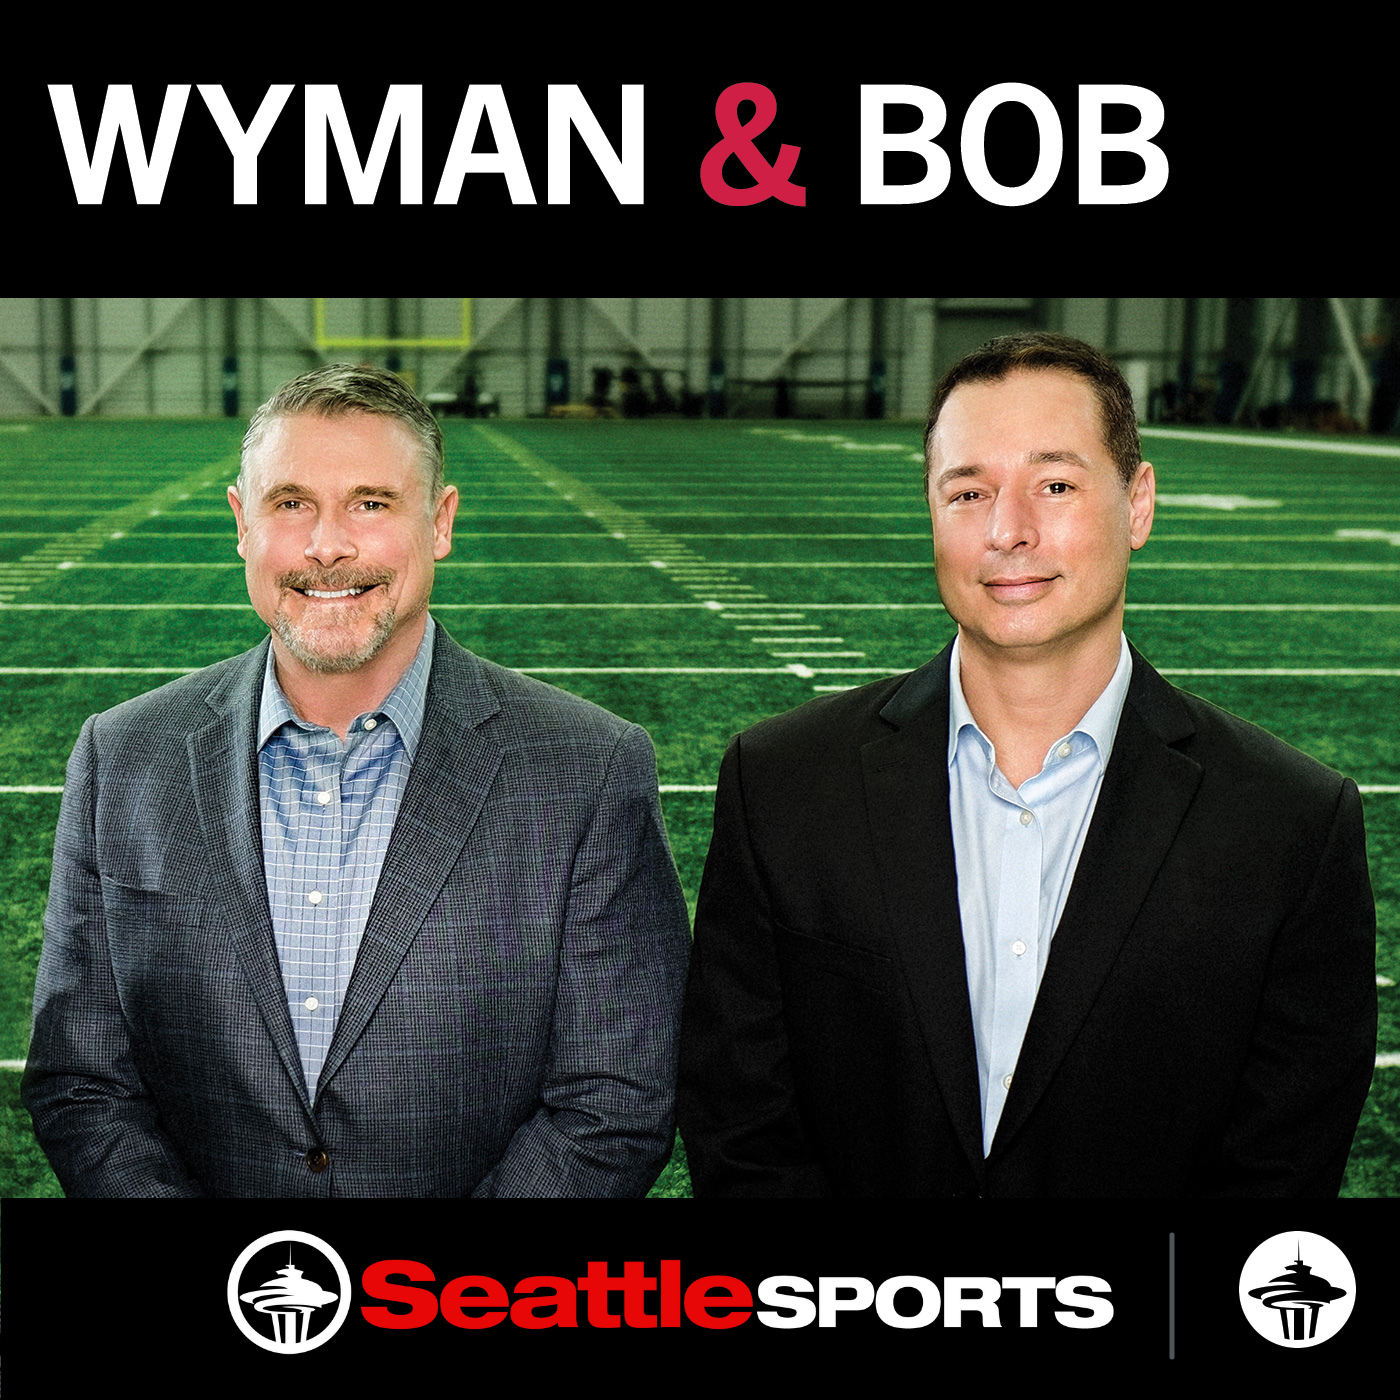 Hour 1 - The importance of the Seahawks balanced offense